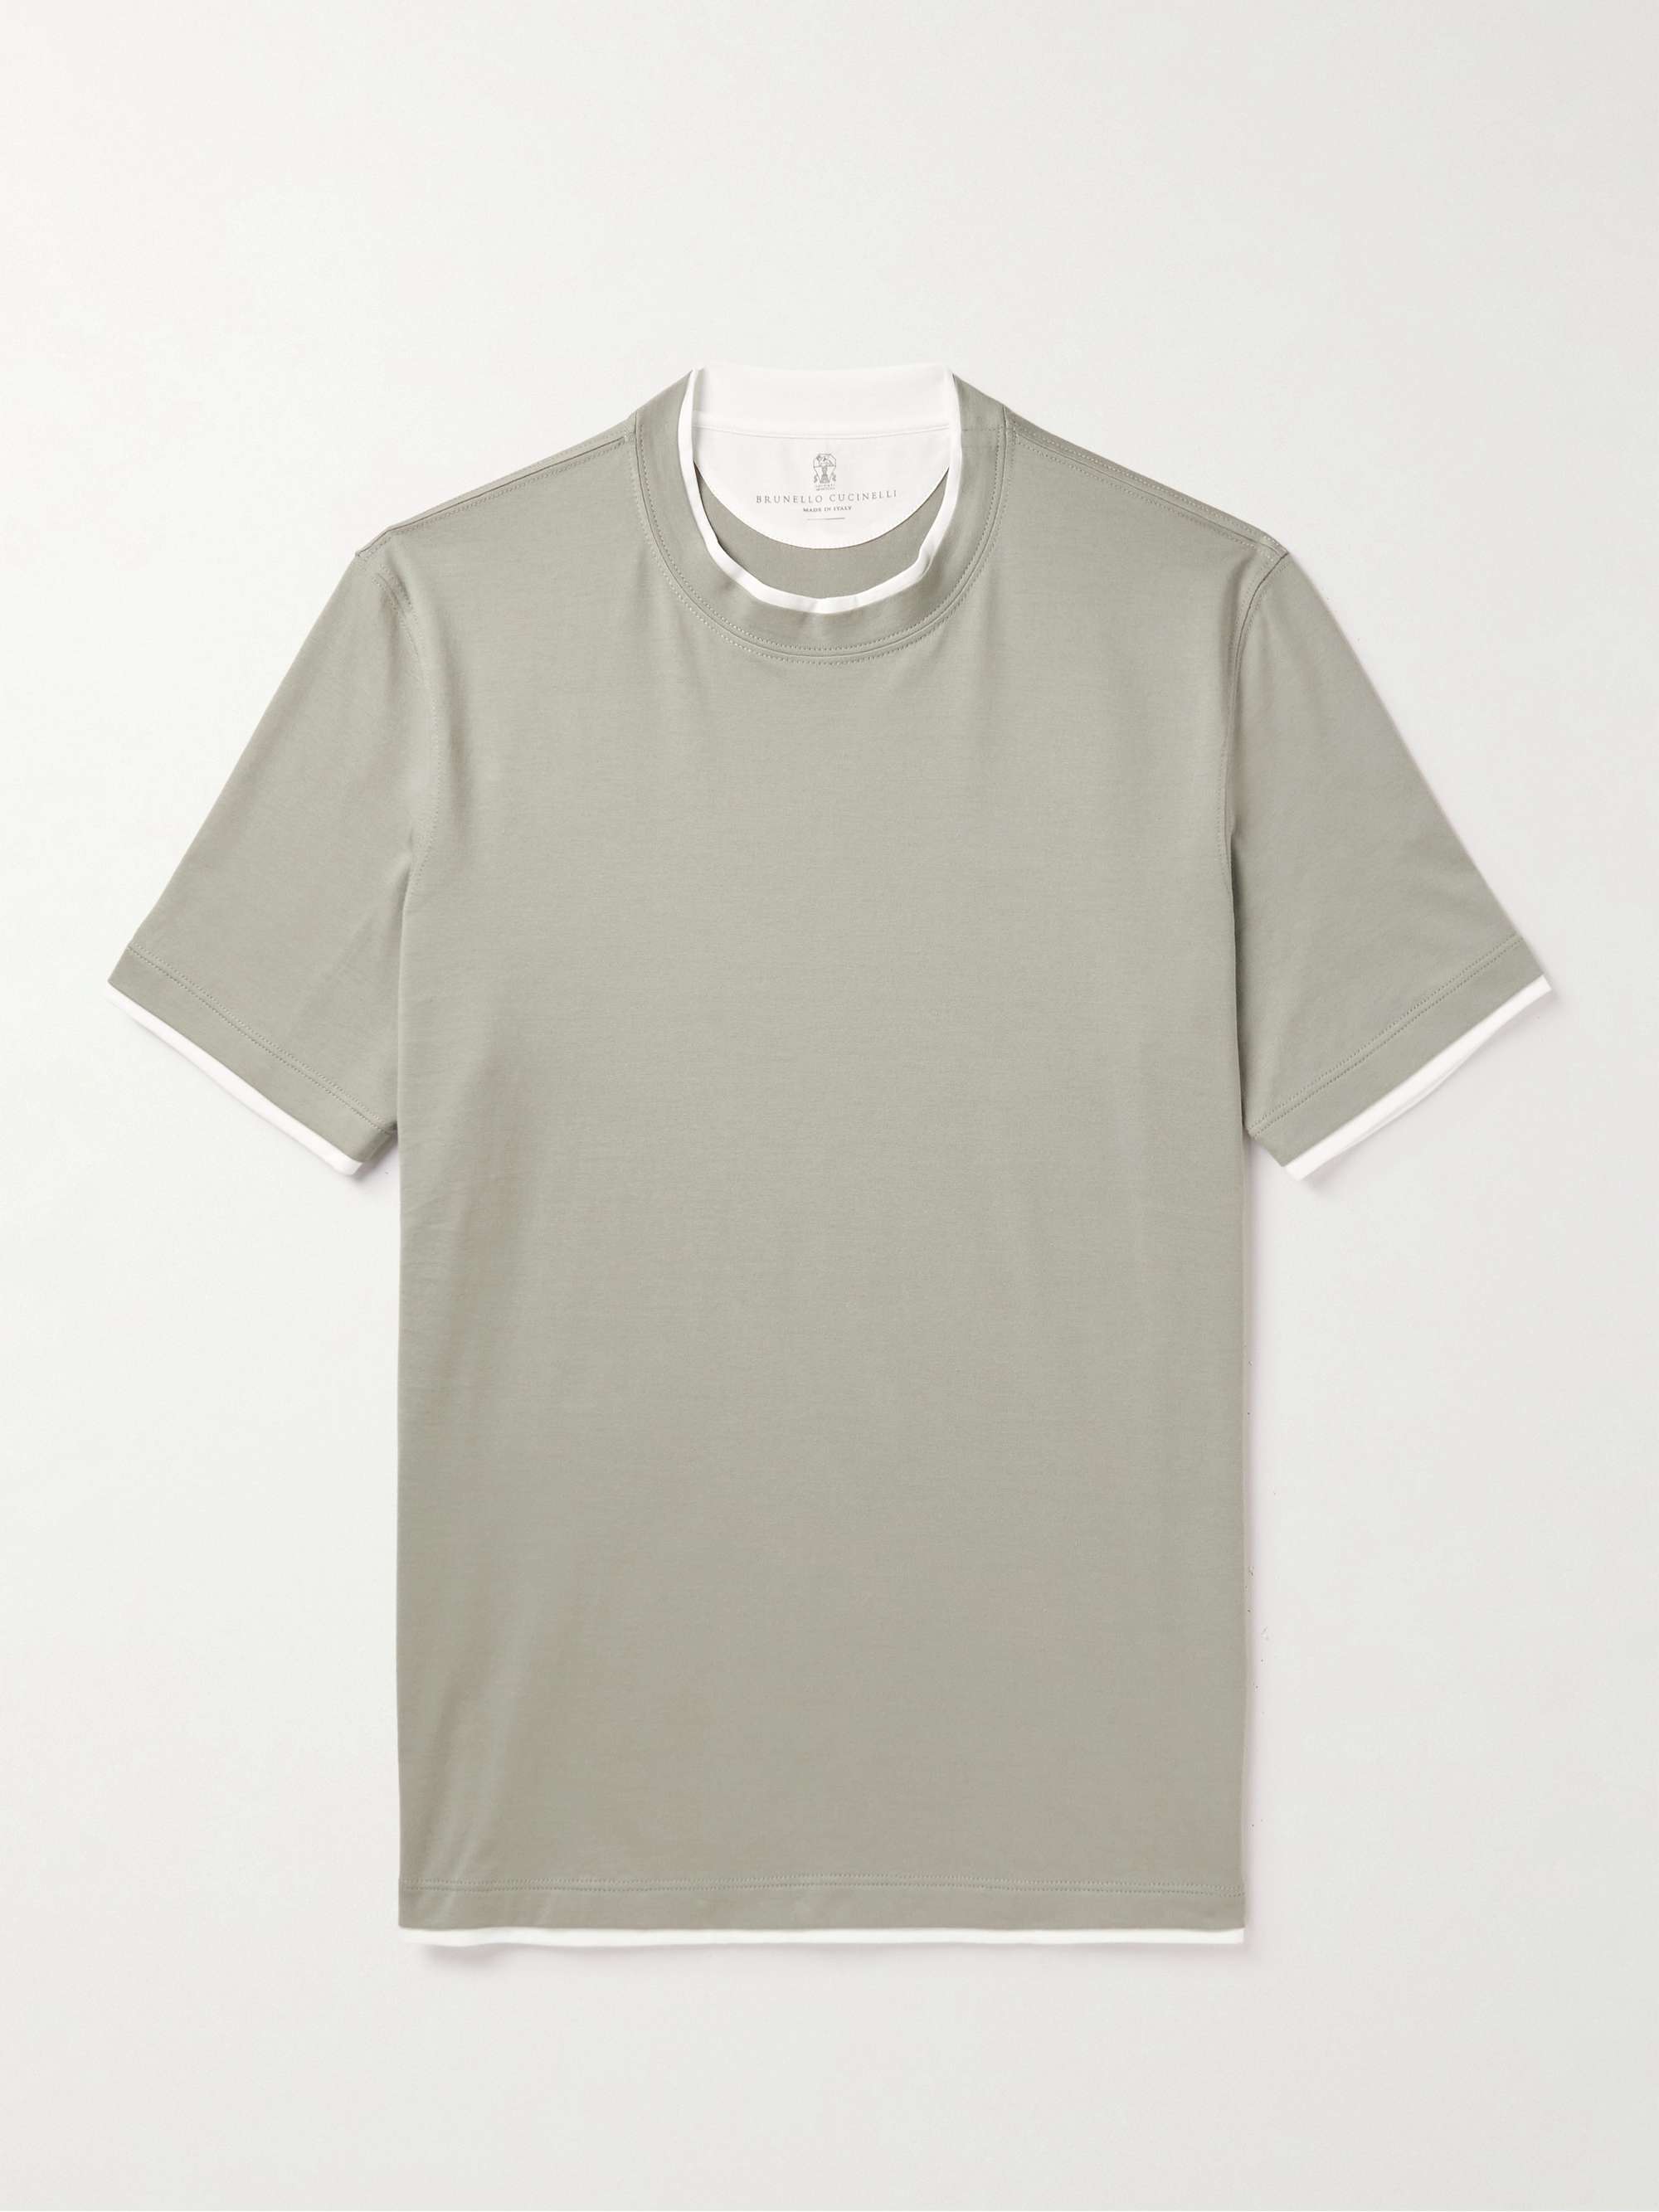 BRUNELLO CUCINELLI Contrast-Tipped Cotton-Jersey T-Shirt